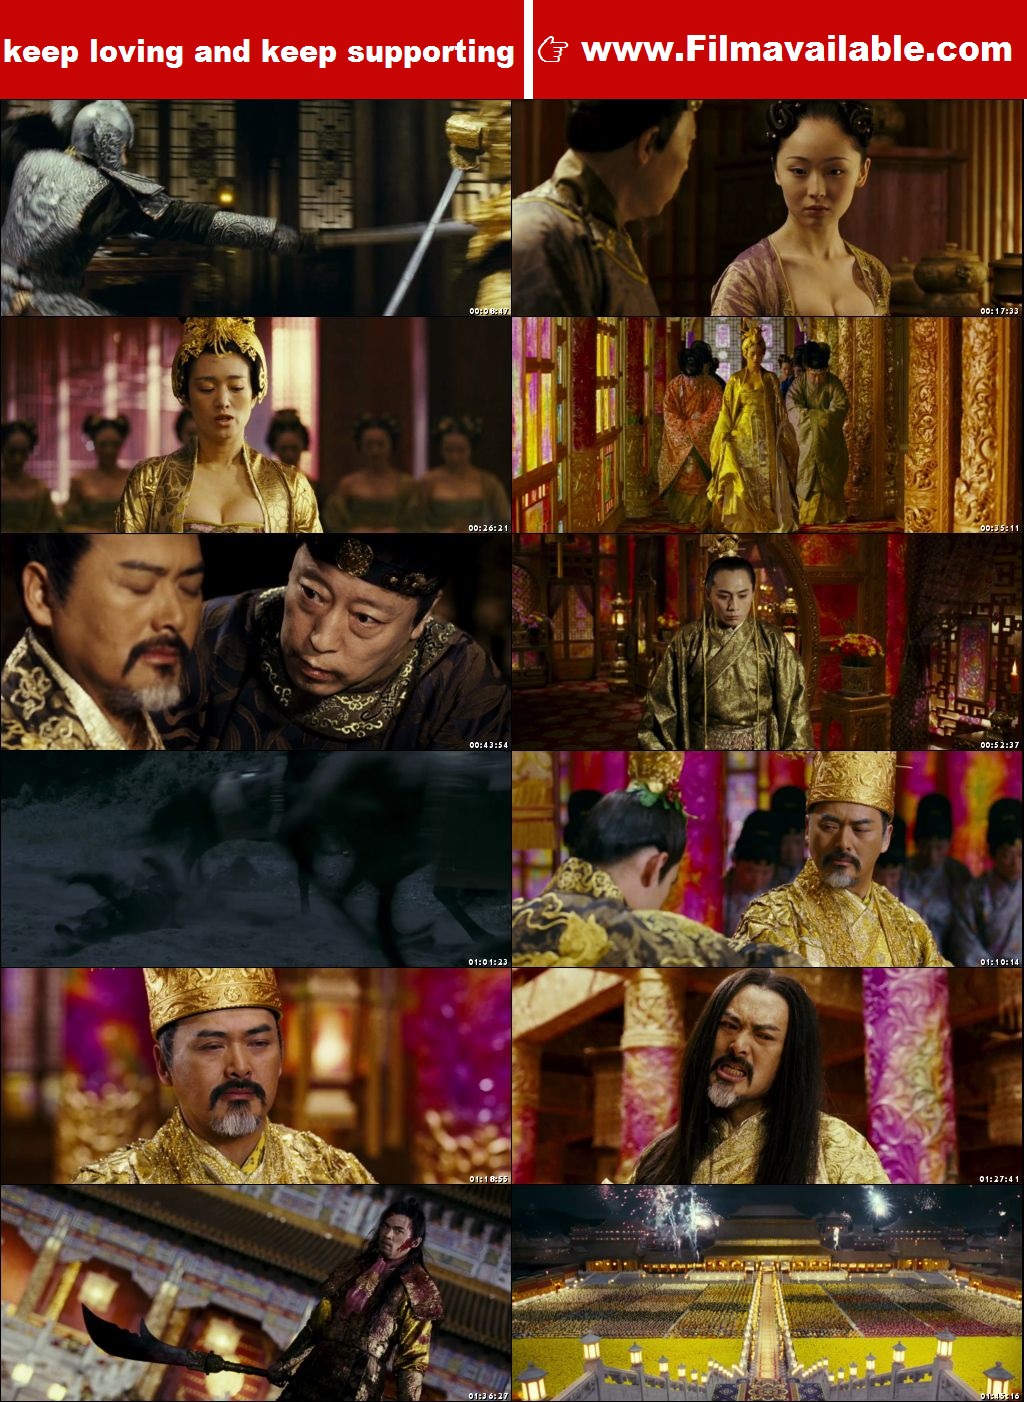 Curse of the Golden Flower 2006 latest movies free download, Curse of the Golden Flower 2006 hd movies download, Curse of the Golden Flower 2006 new movie download,Curse of the Golden Flower 2006 download free movies online, Curse of the Golden Flower 2006 hd movies free download